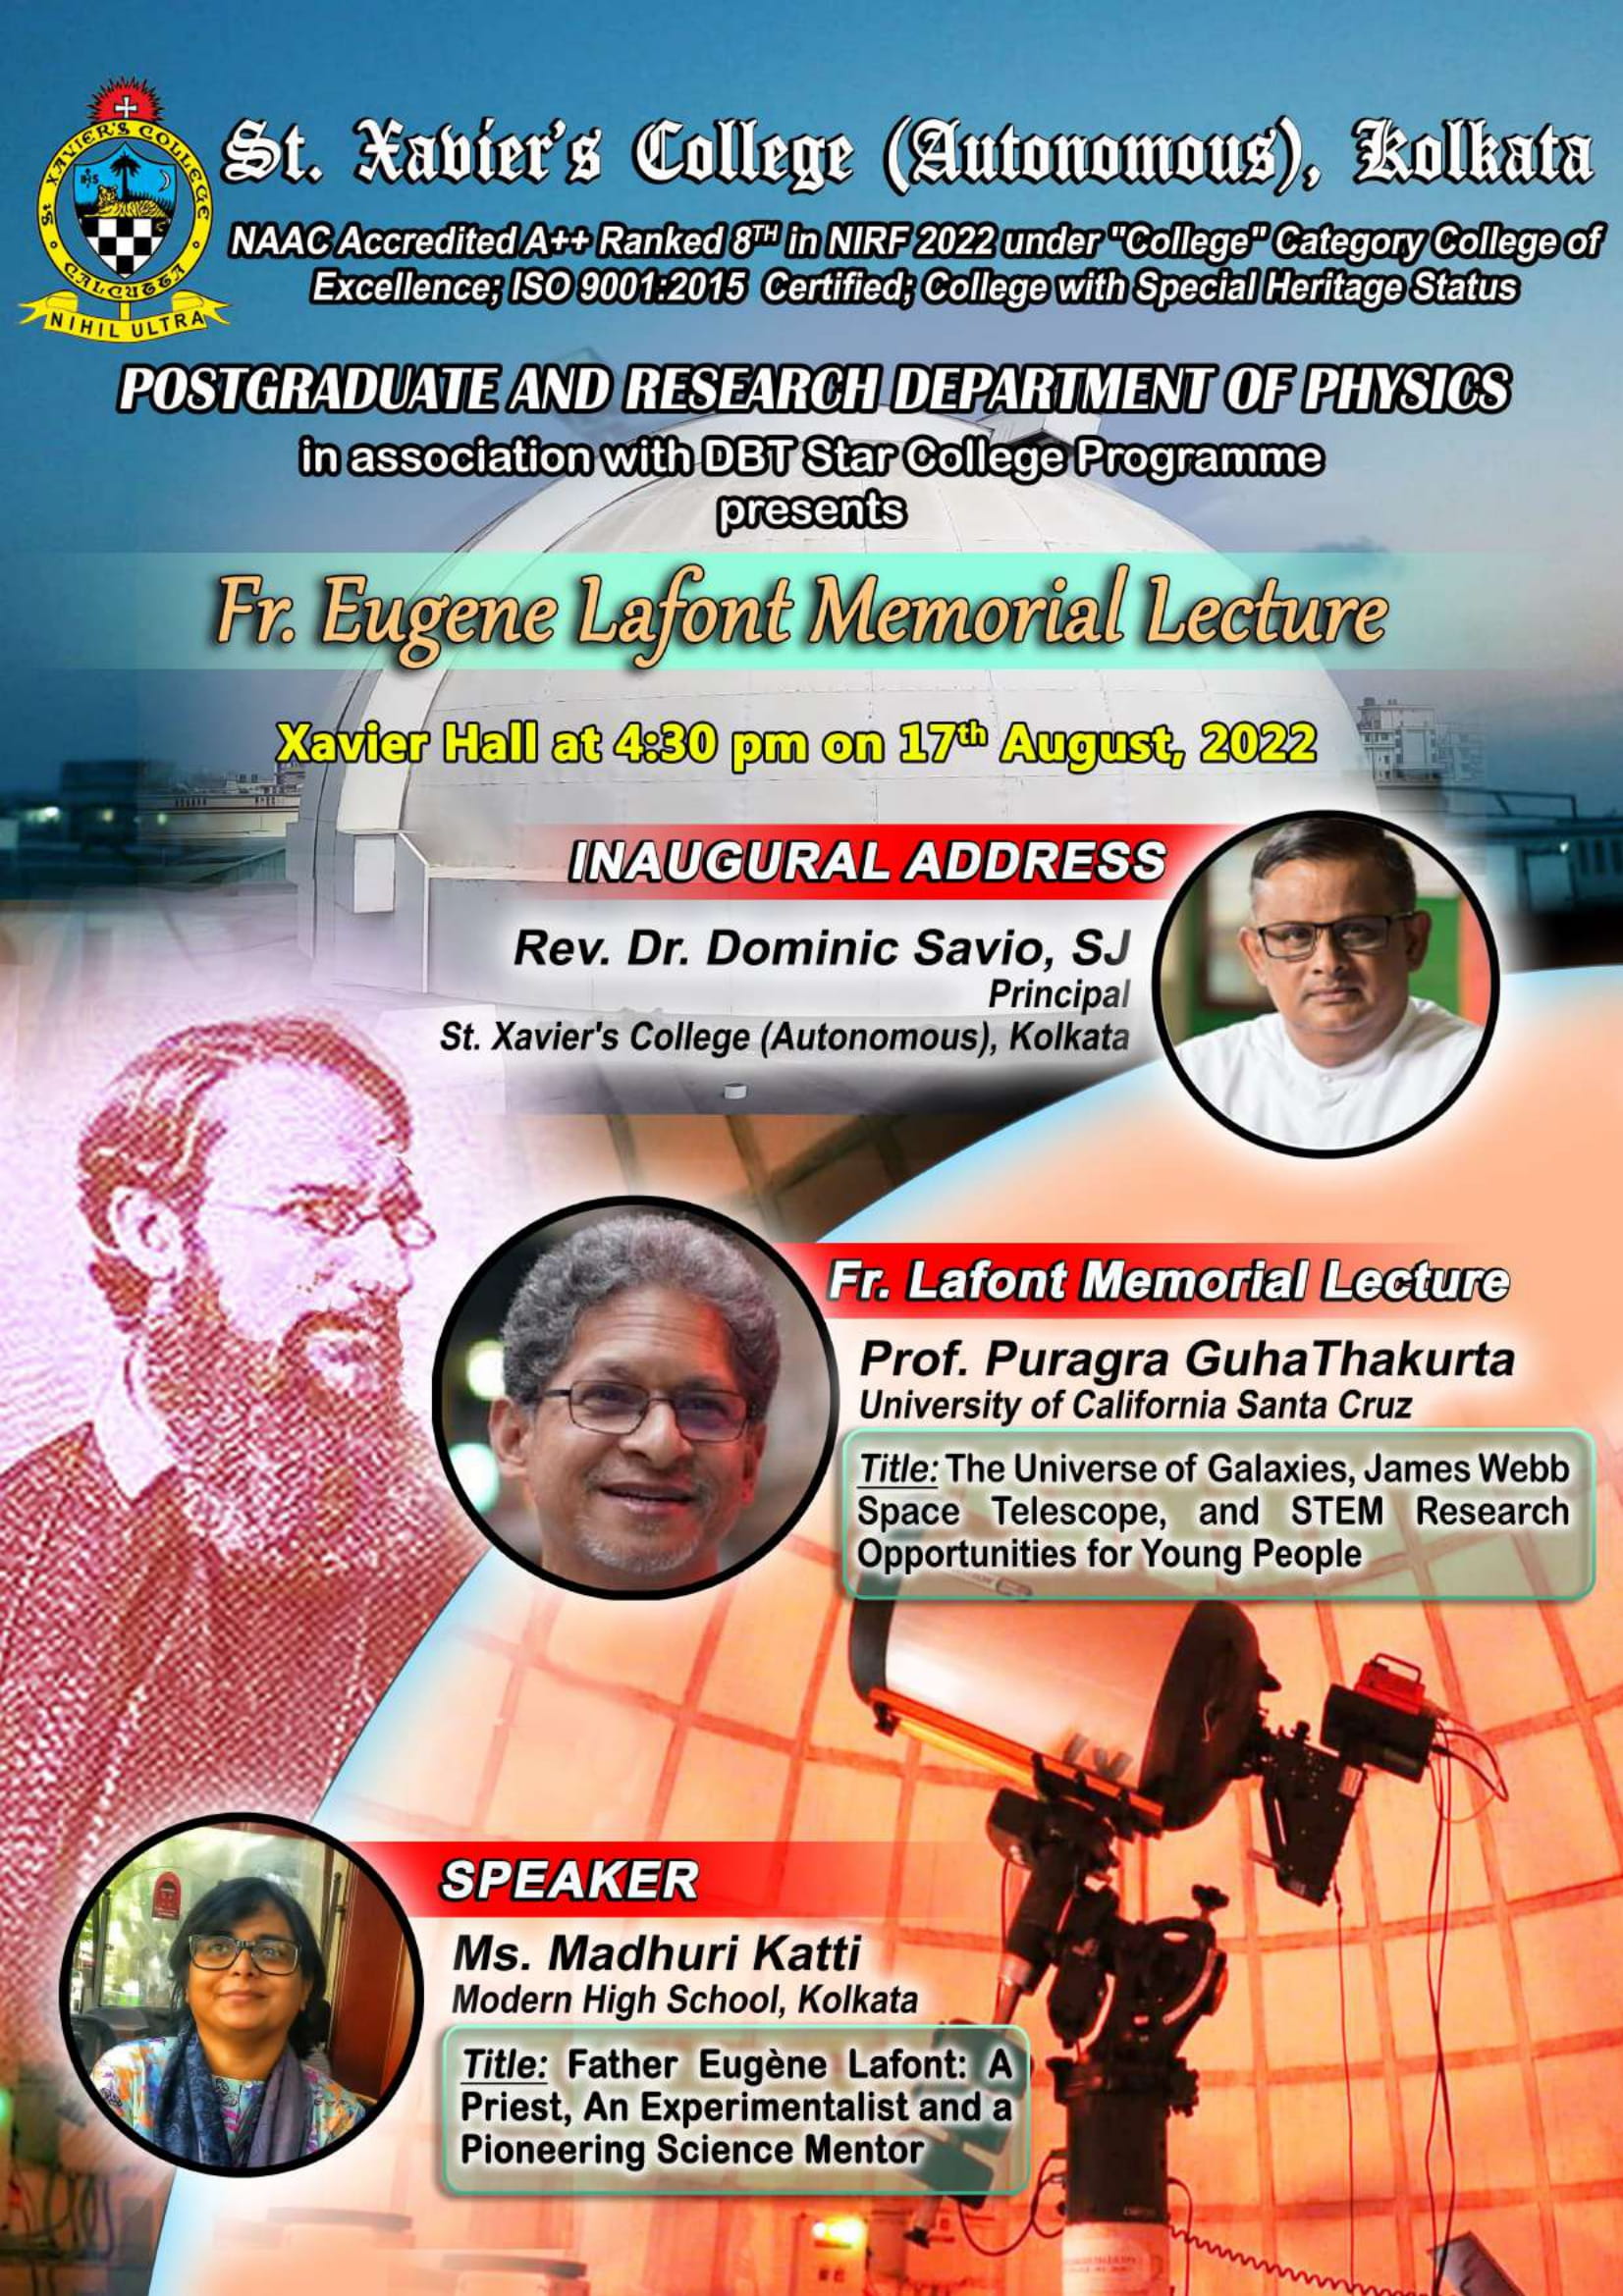 Fr. Eugene Lafont Memorial Lecture - St. Xavier’s College